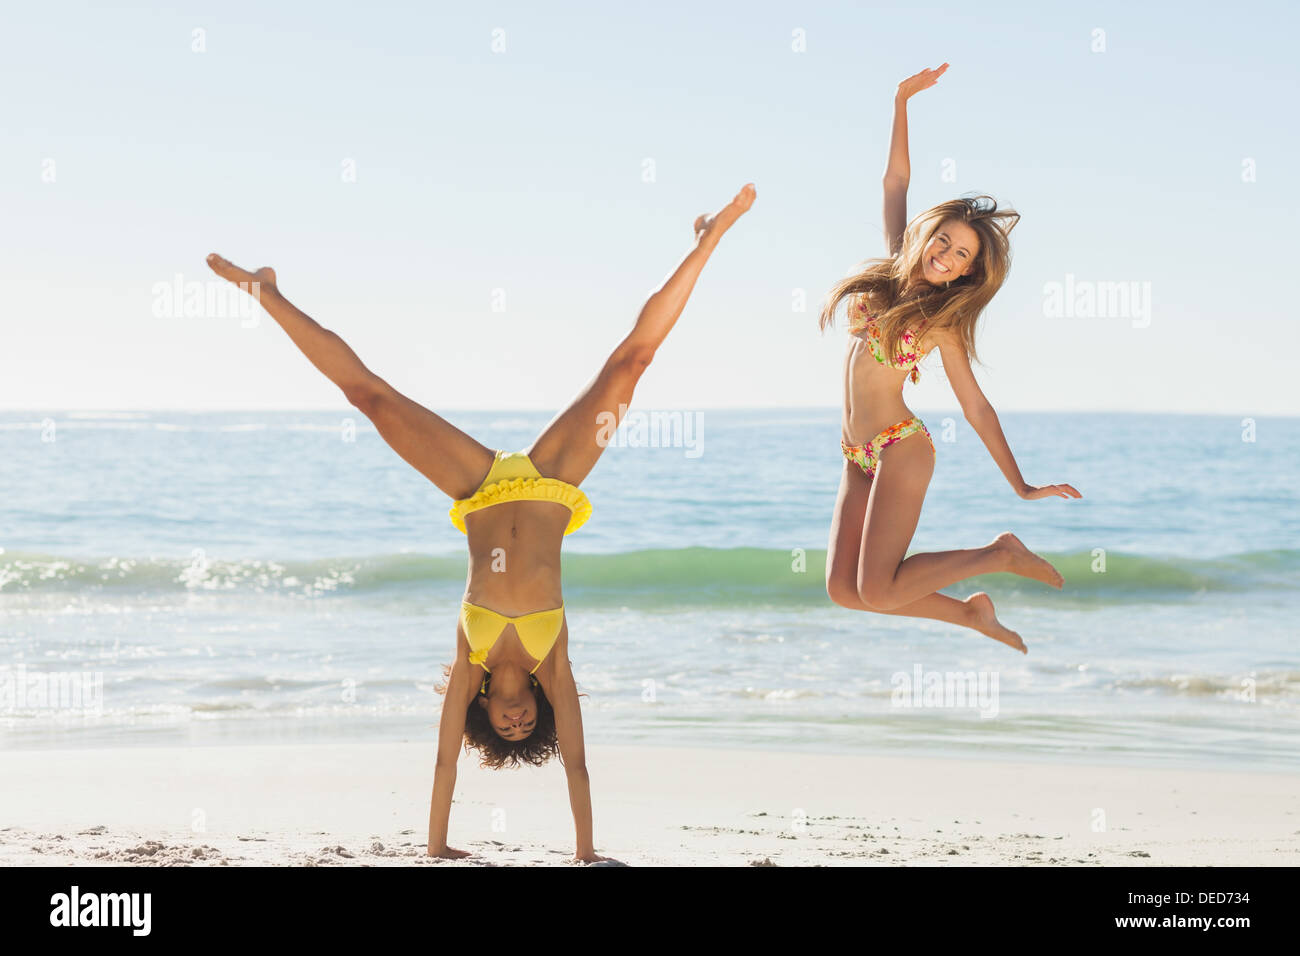 Friends in bikinis jumping and doing handstand Stock Photo